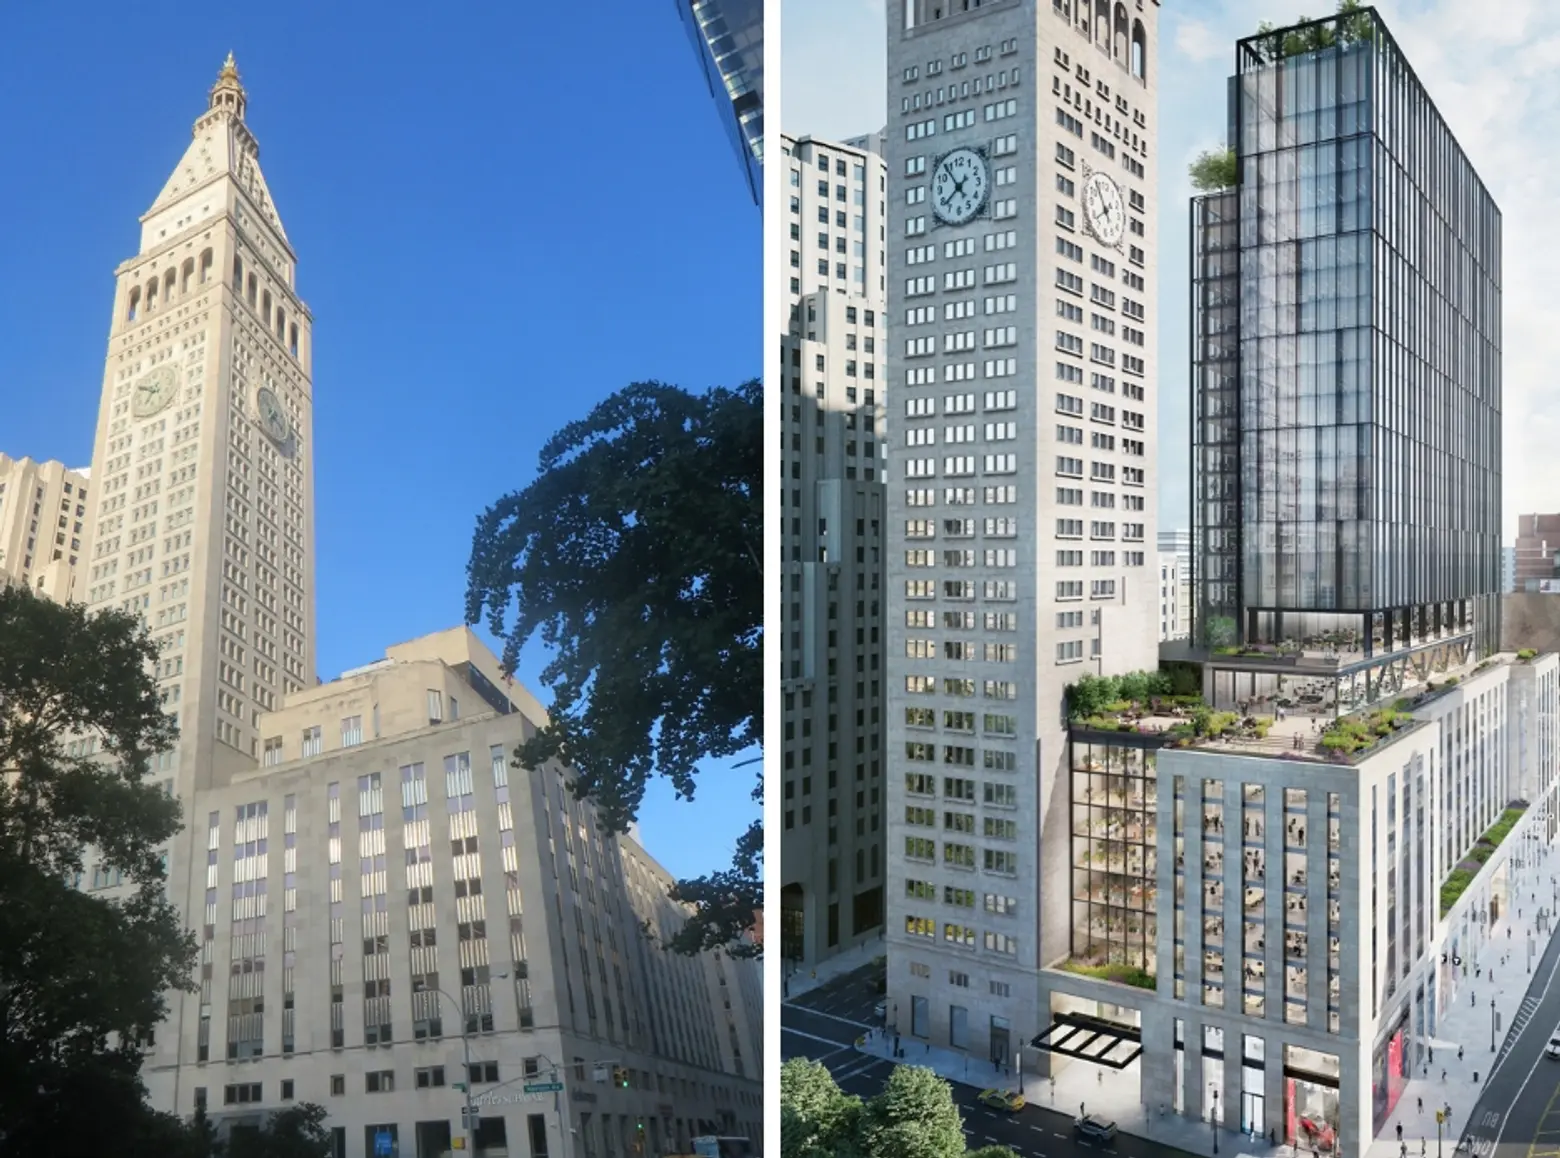 Nomad’s One Madison Avenue is getting an 18-floor addition designed by Kohn Pedersen Fox